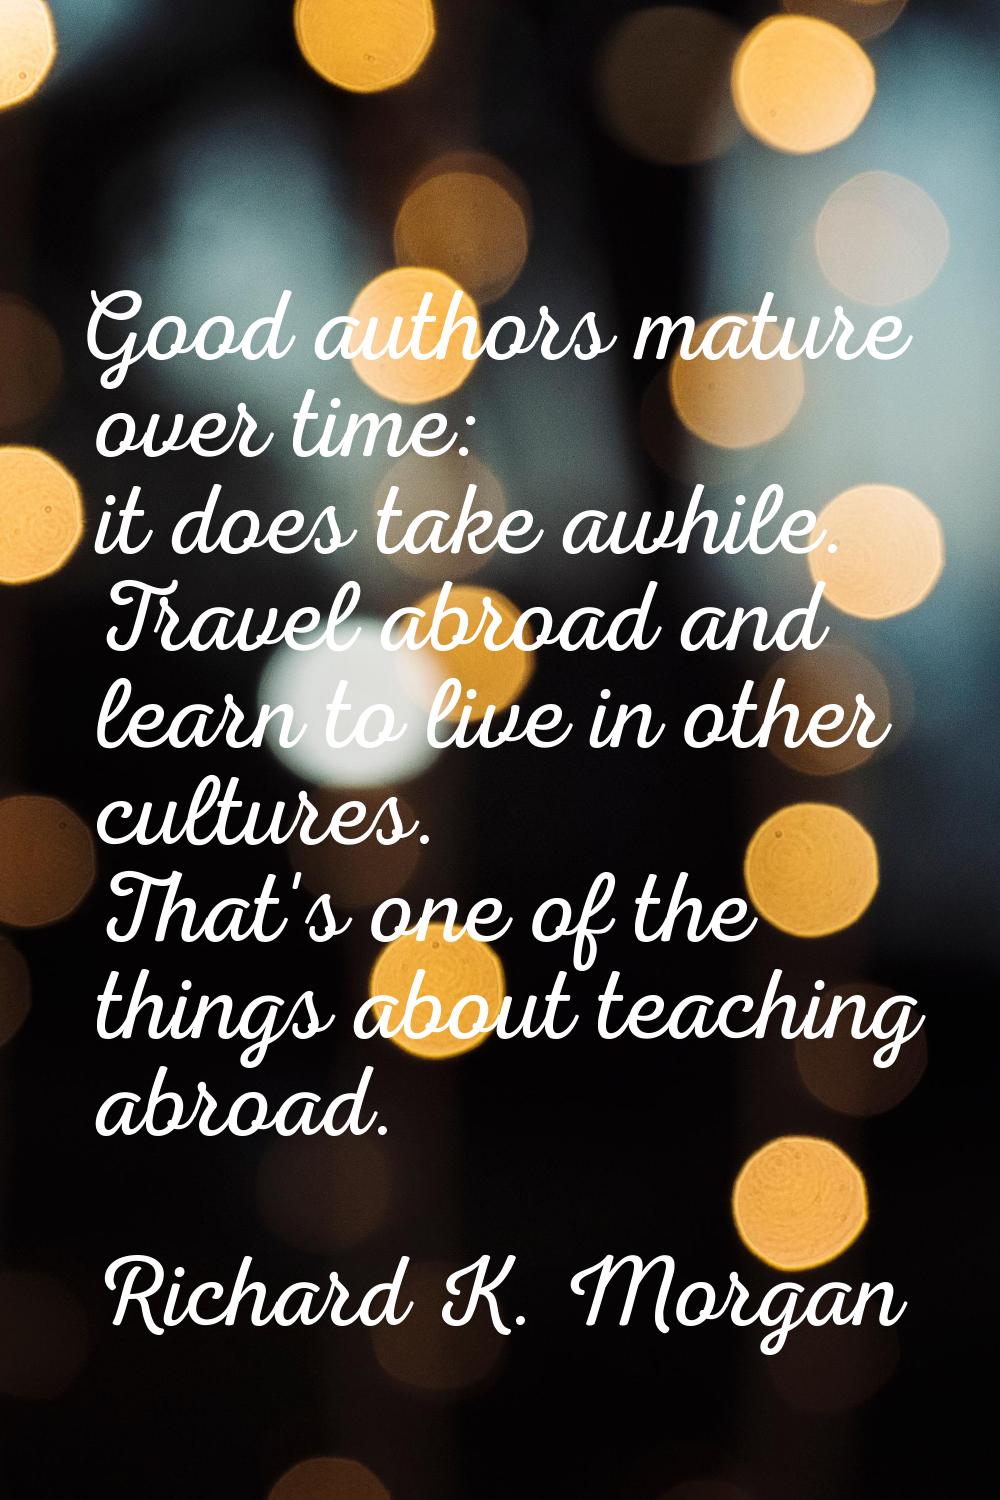 Good authors mature over time: it does take awhile. Travel abroad and learn to live in other cultur